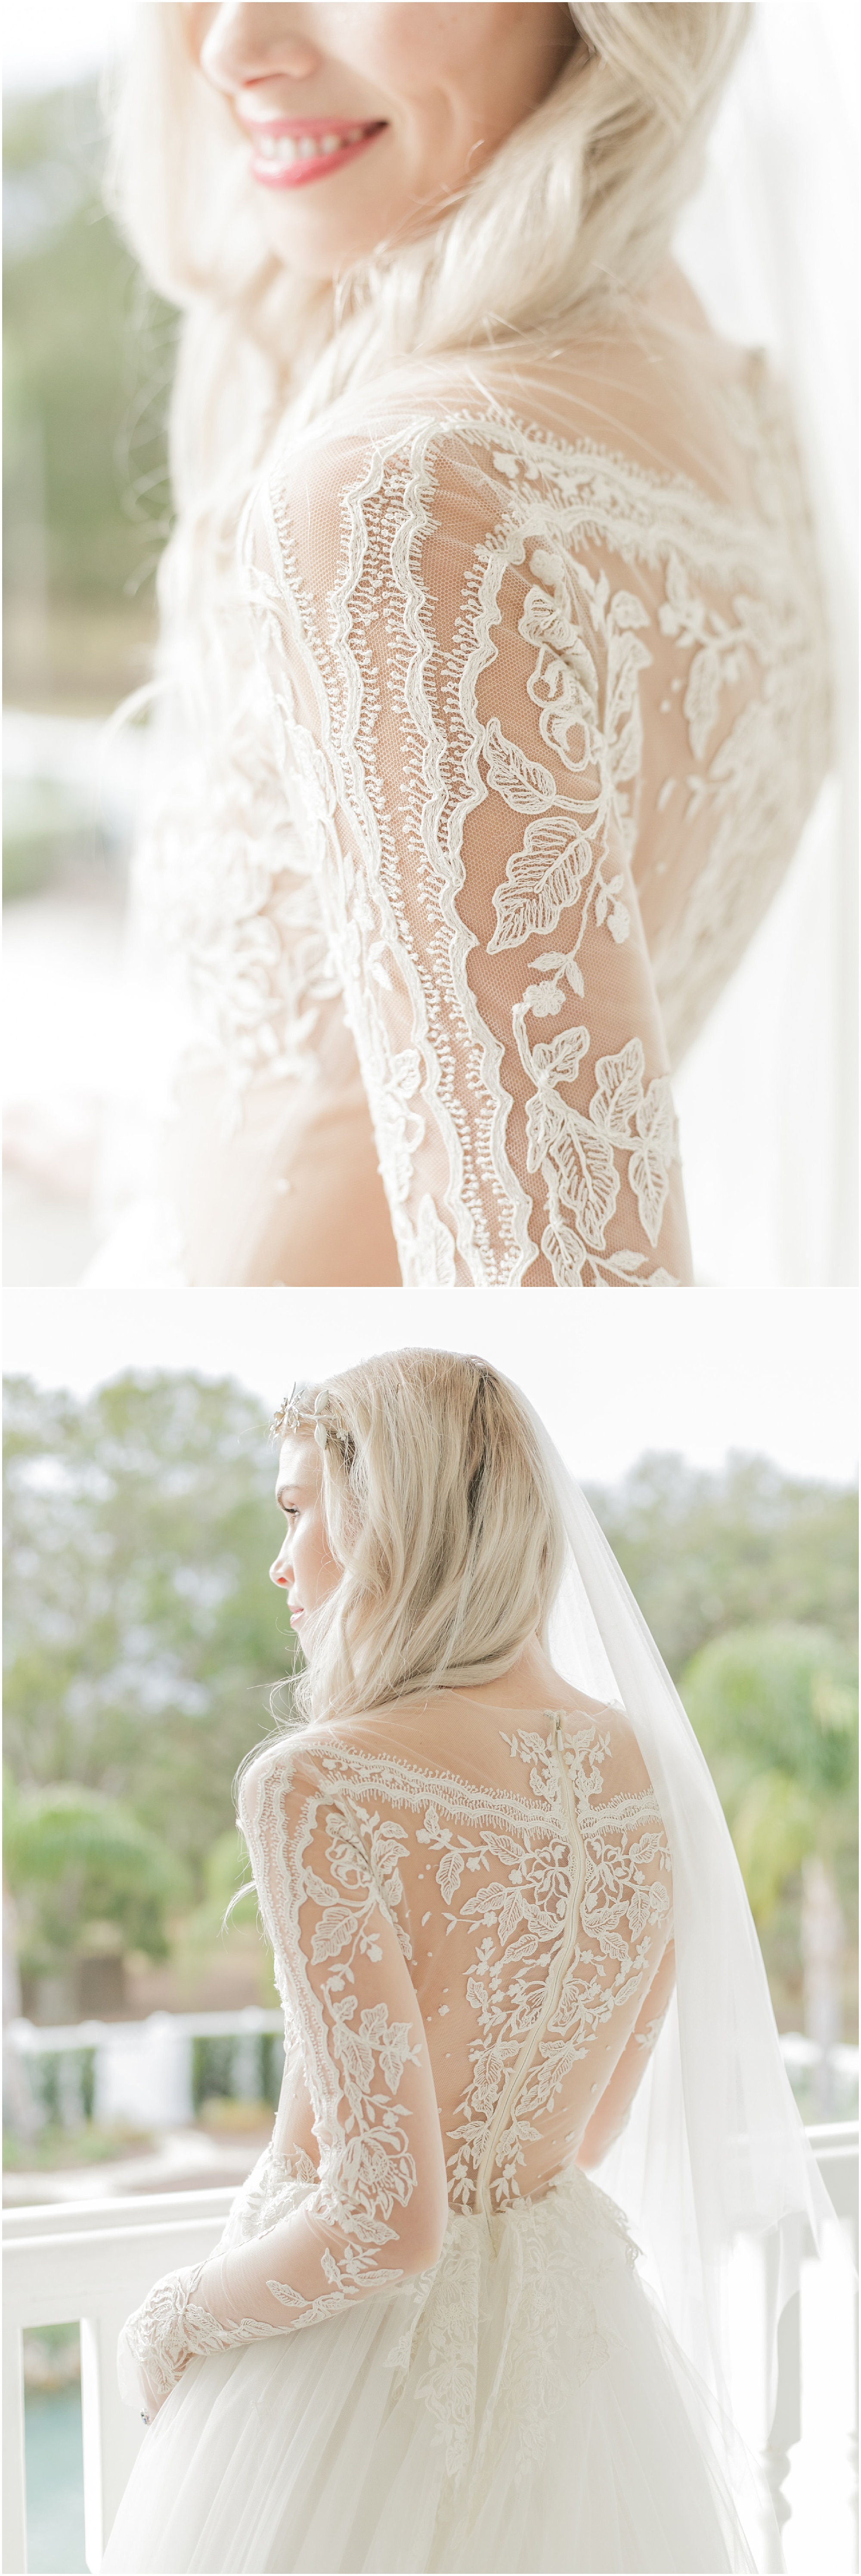 Intricate illusion lace details on the wedding dress.